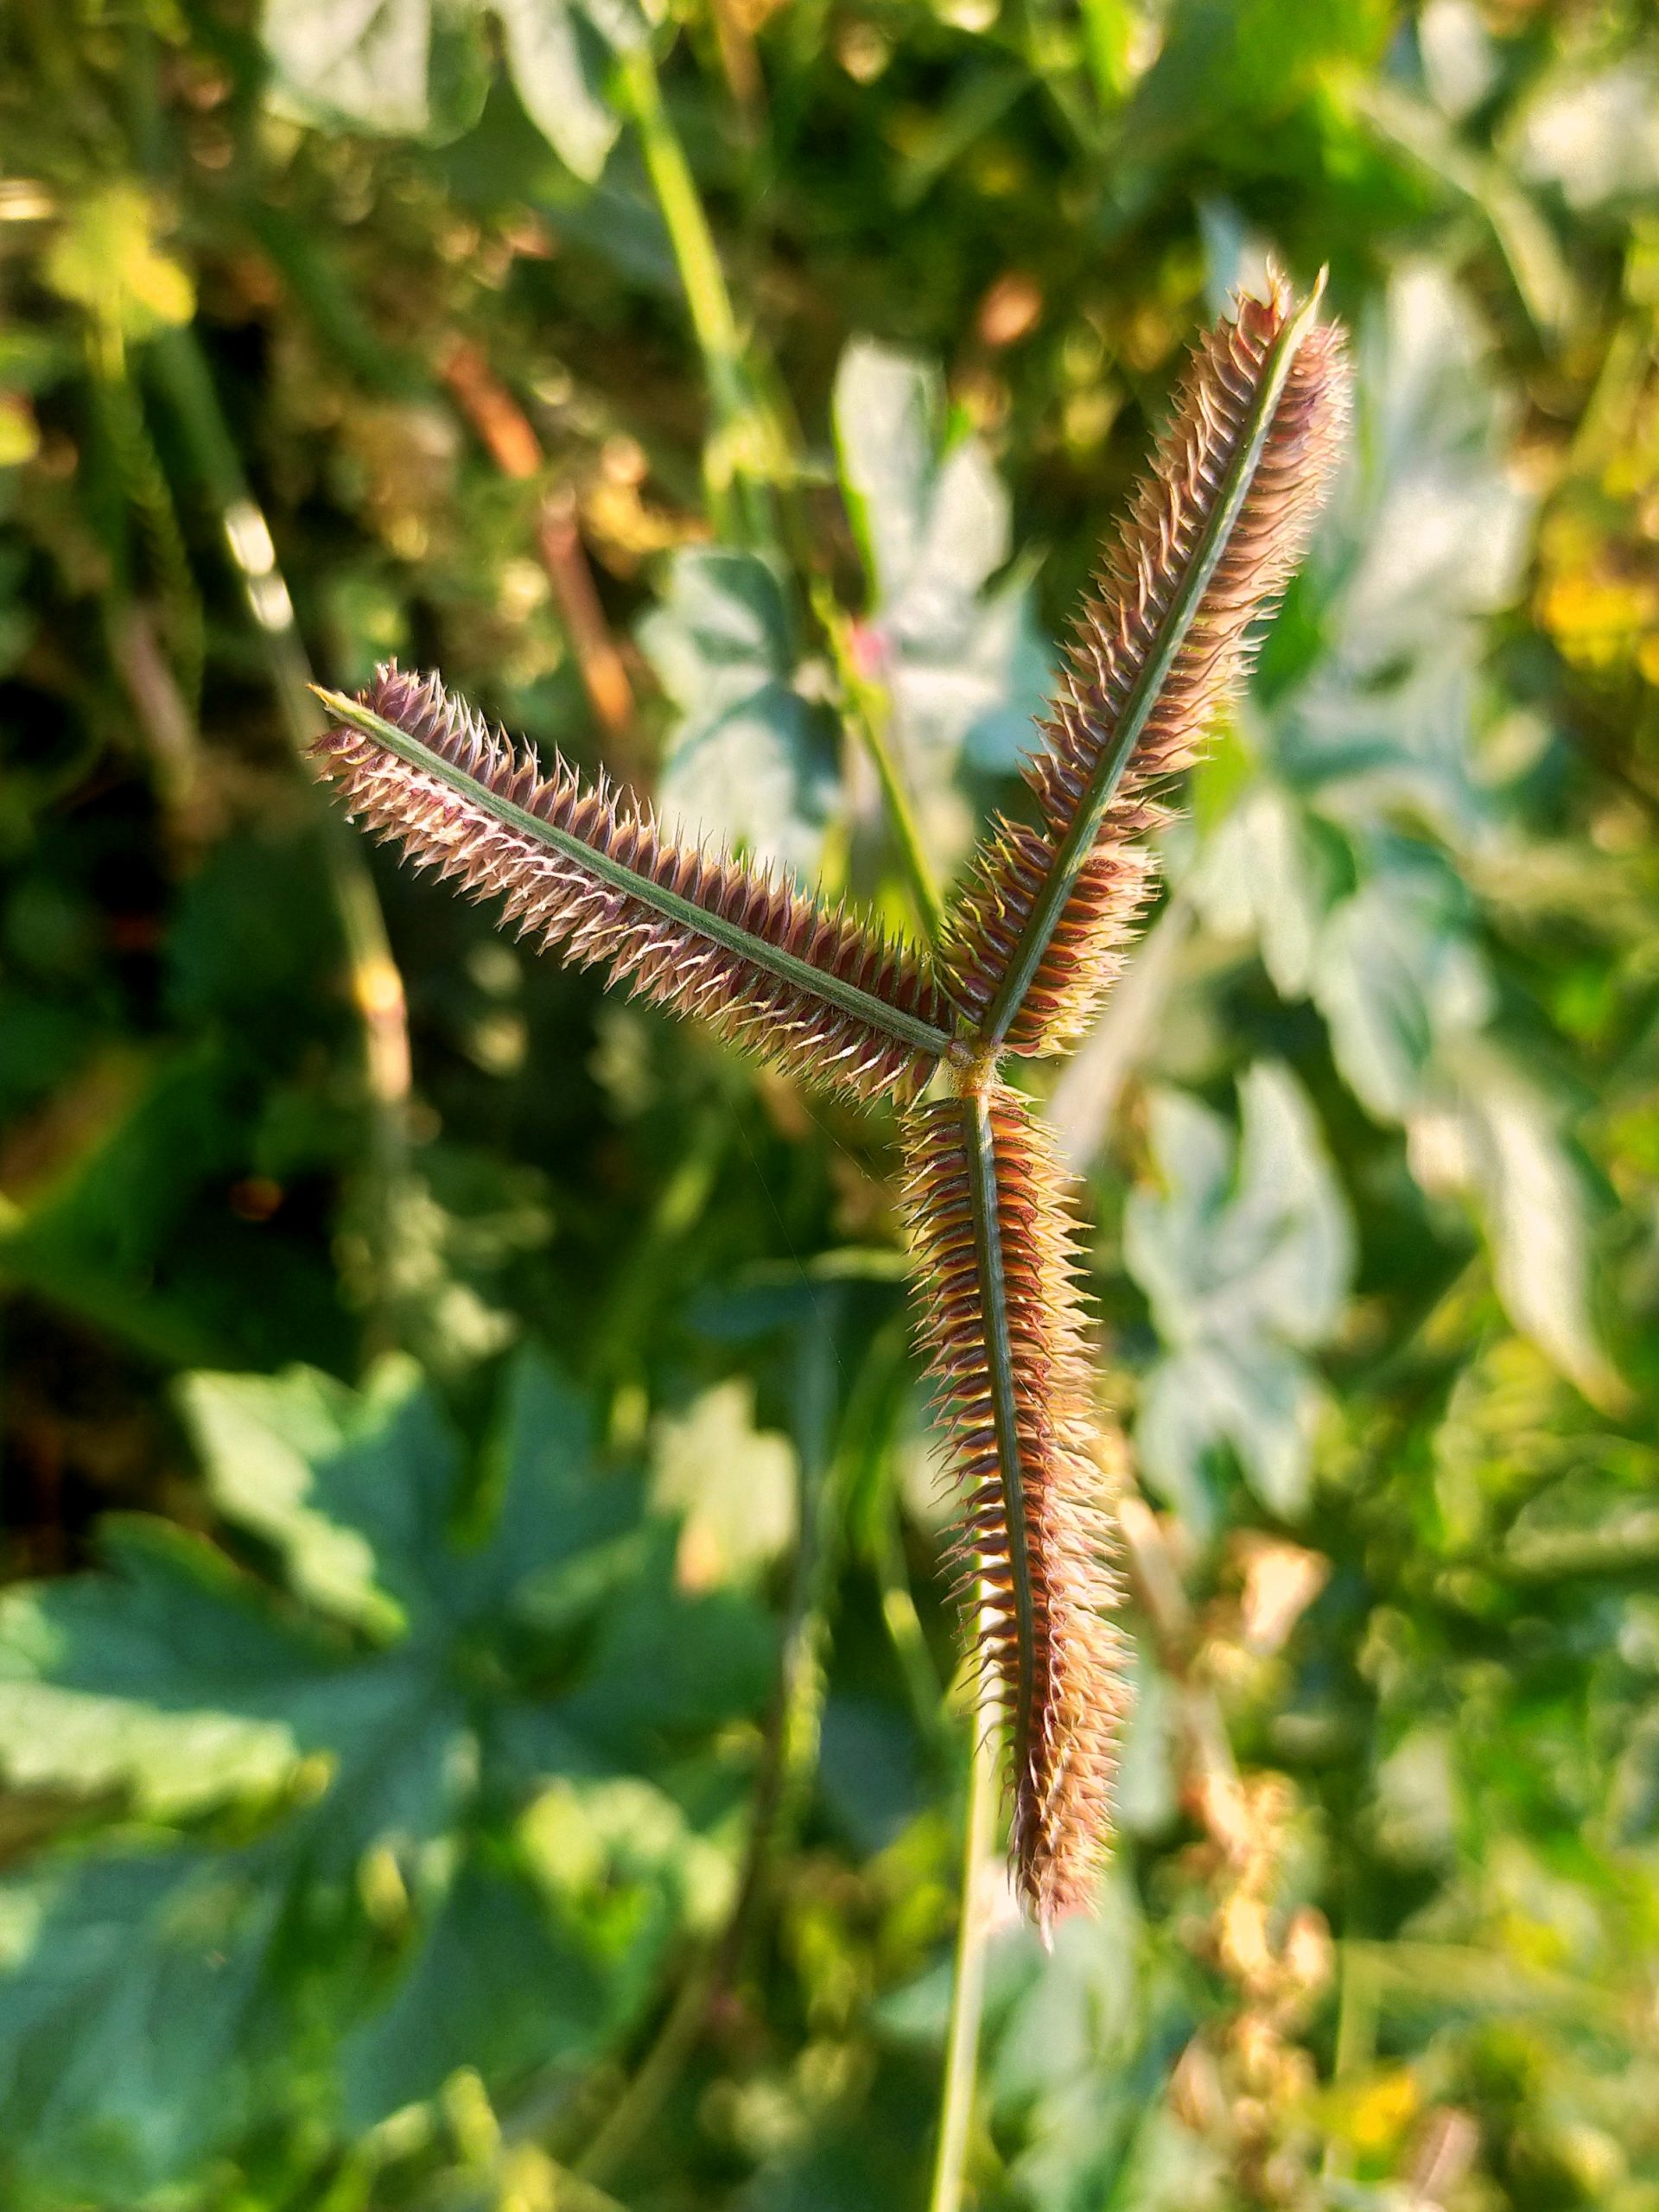 Leaves of a grass plant